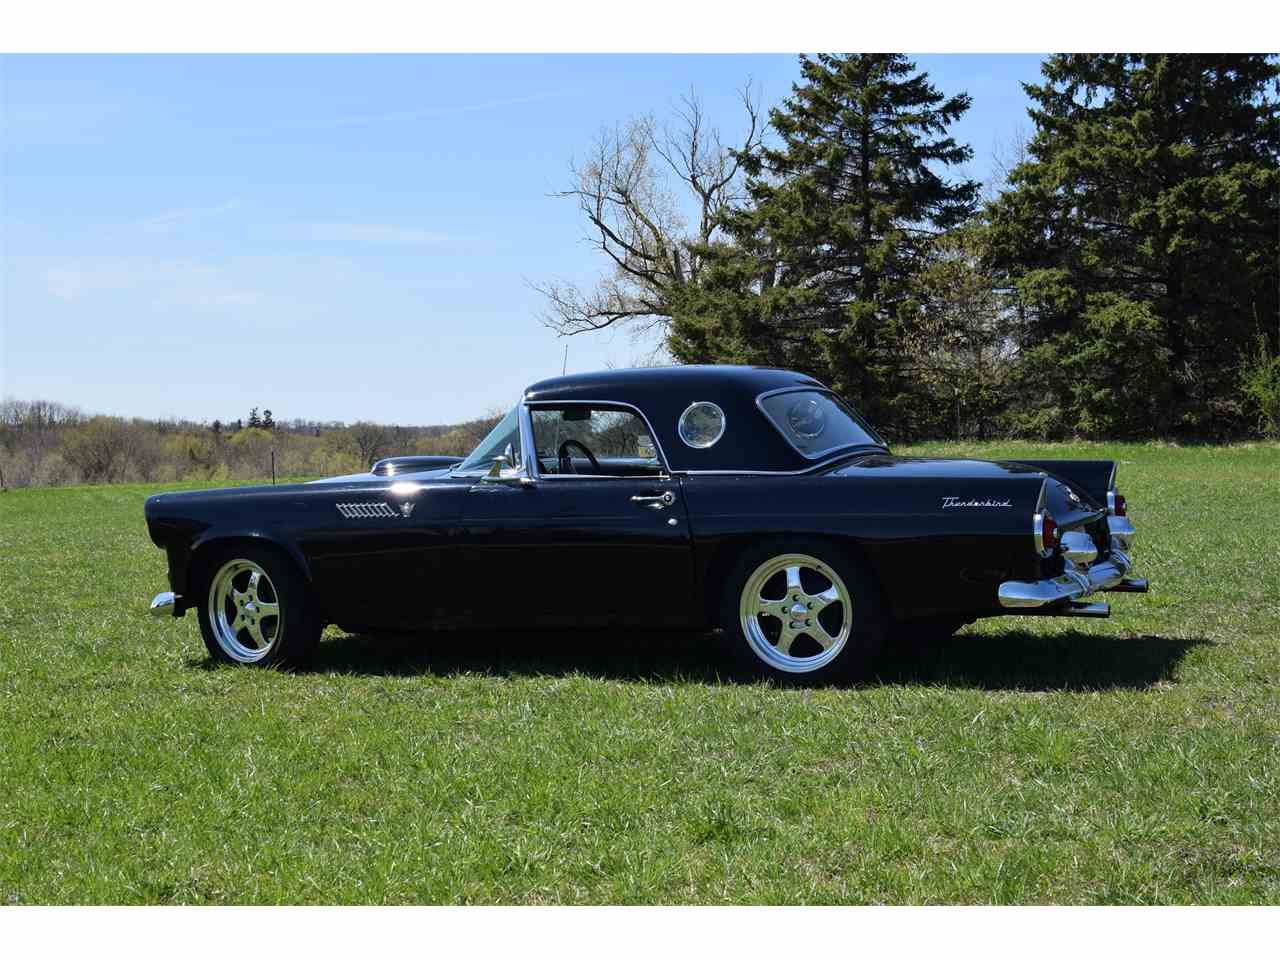 1955 Ford Race Car For Sale Classiccars Cc 978661 throughout The Most Incredible classic cars watertown mn for Your favorite car reference